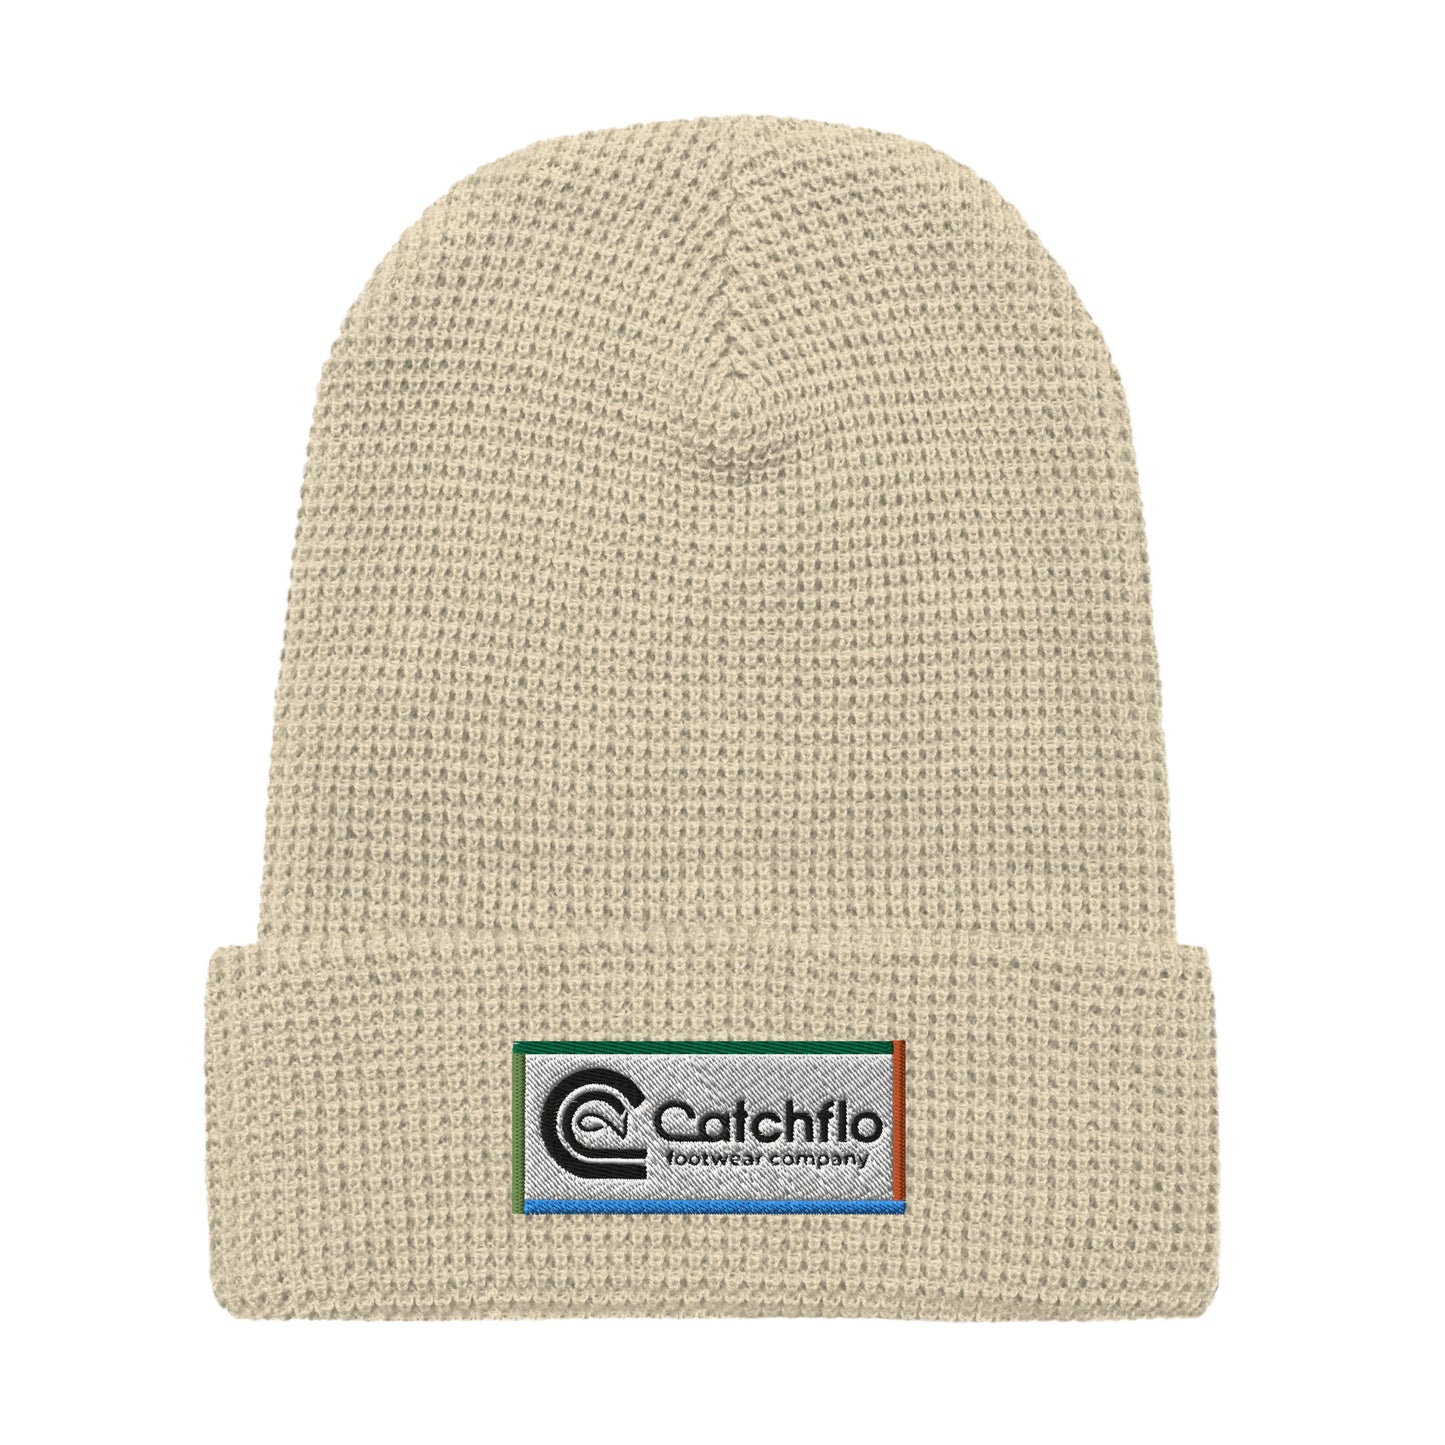 Catchflo Footwear Company Waffle Beanie (8 color choices)